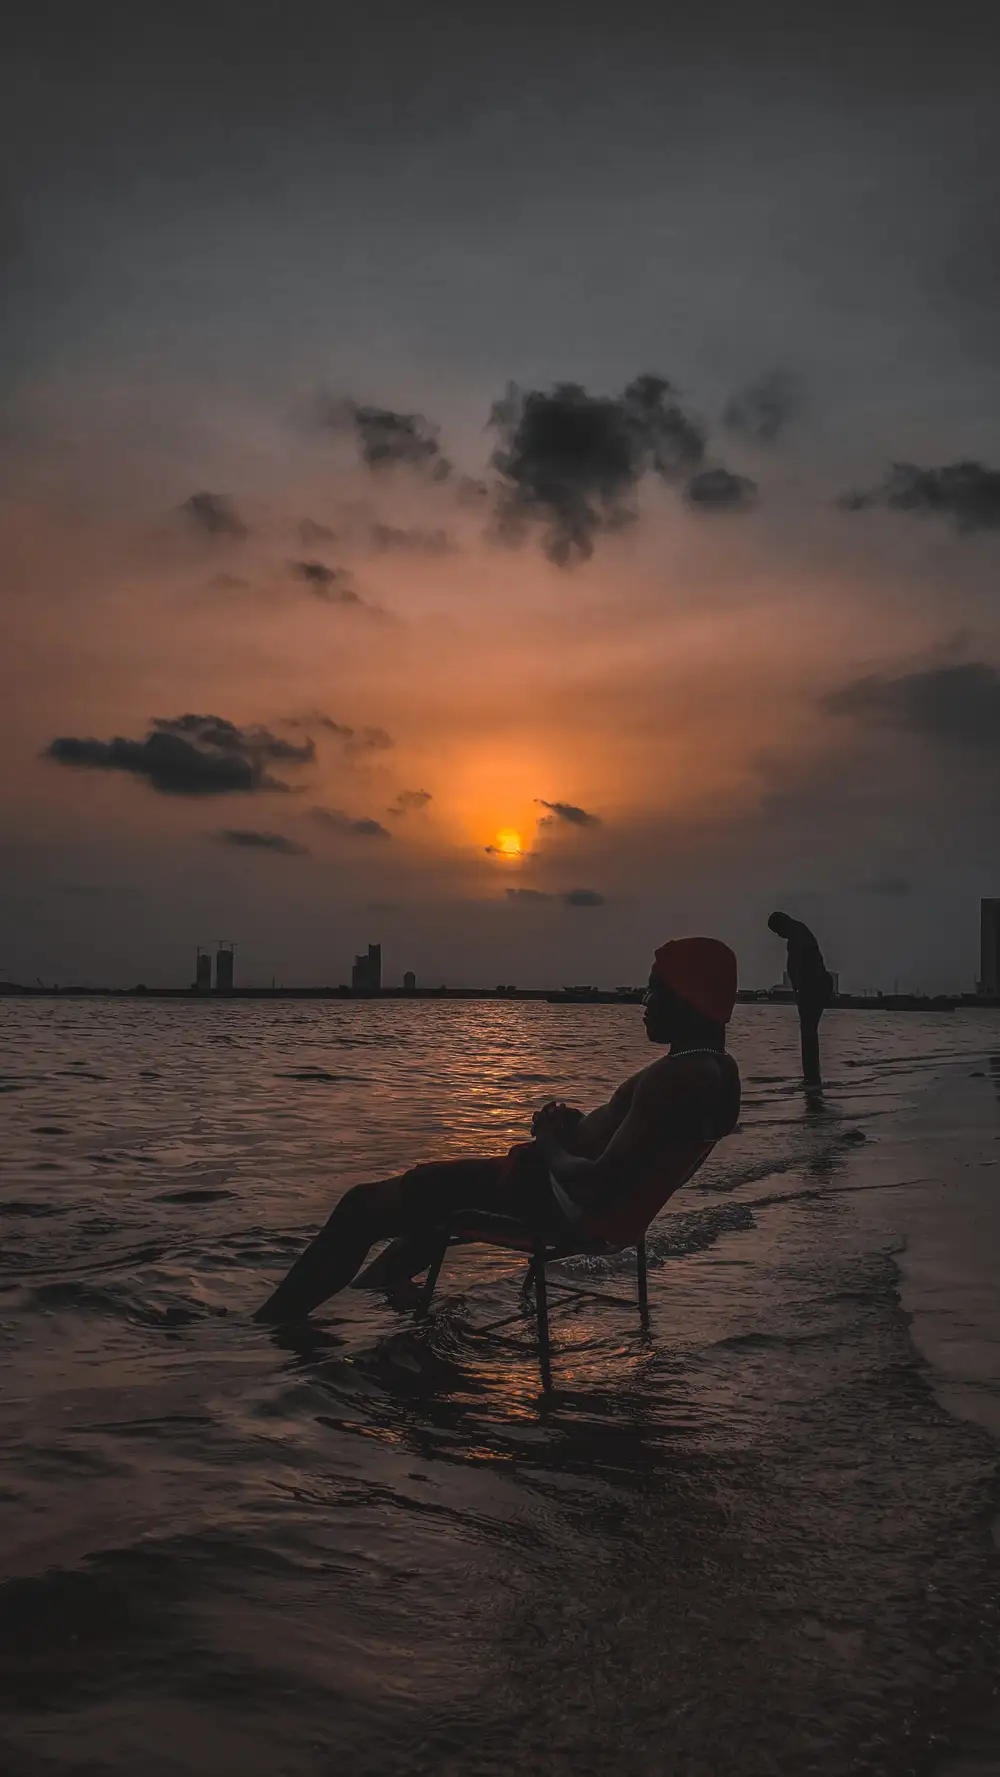 Man sitting on a chair at the beach